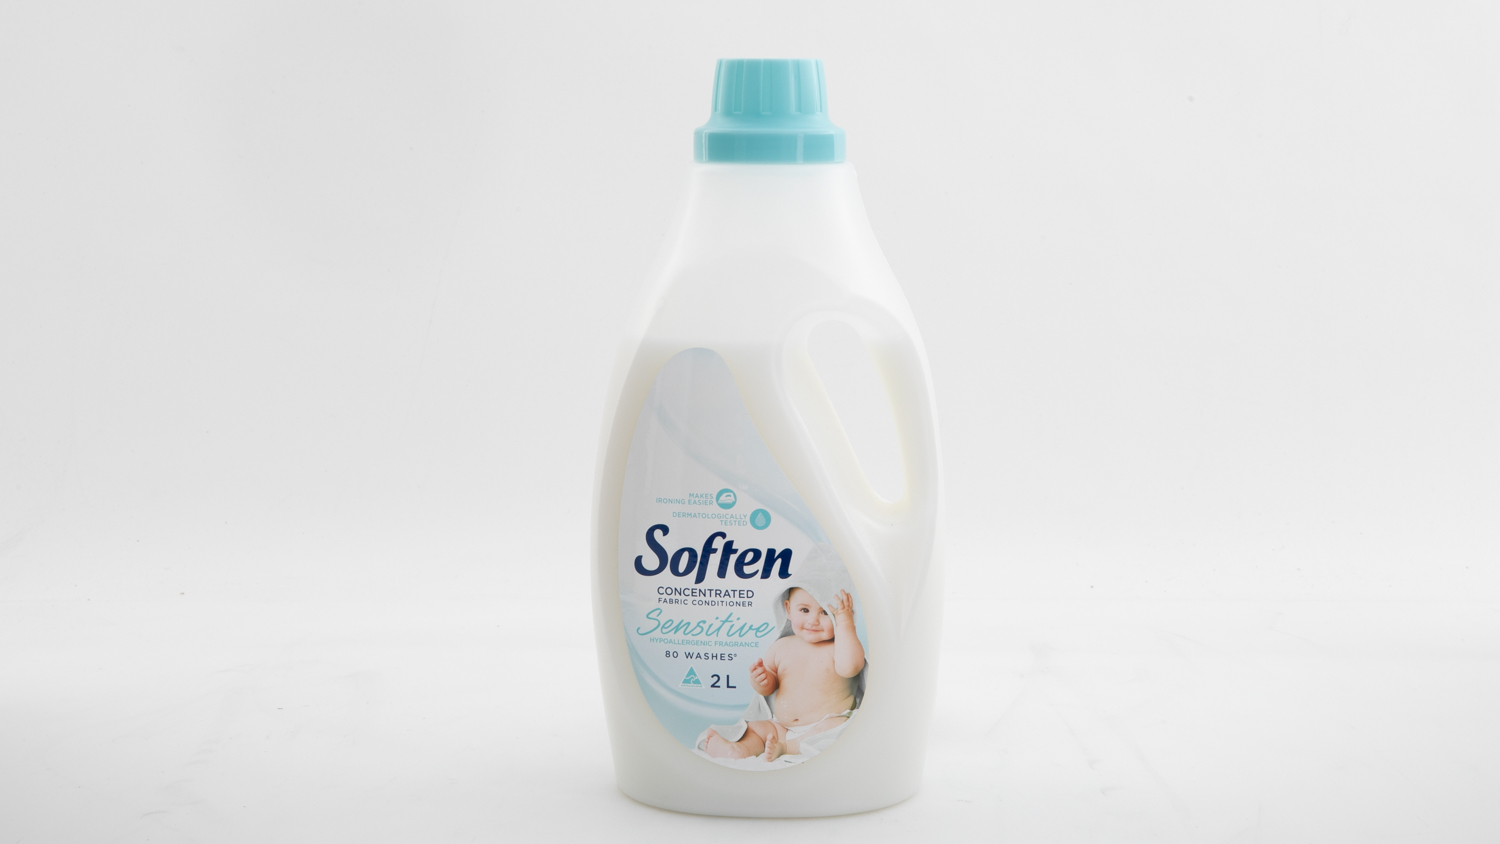 Woolworths Soften Concentrated Fabric Conditioner Sensitive carousel image